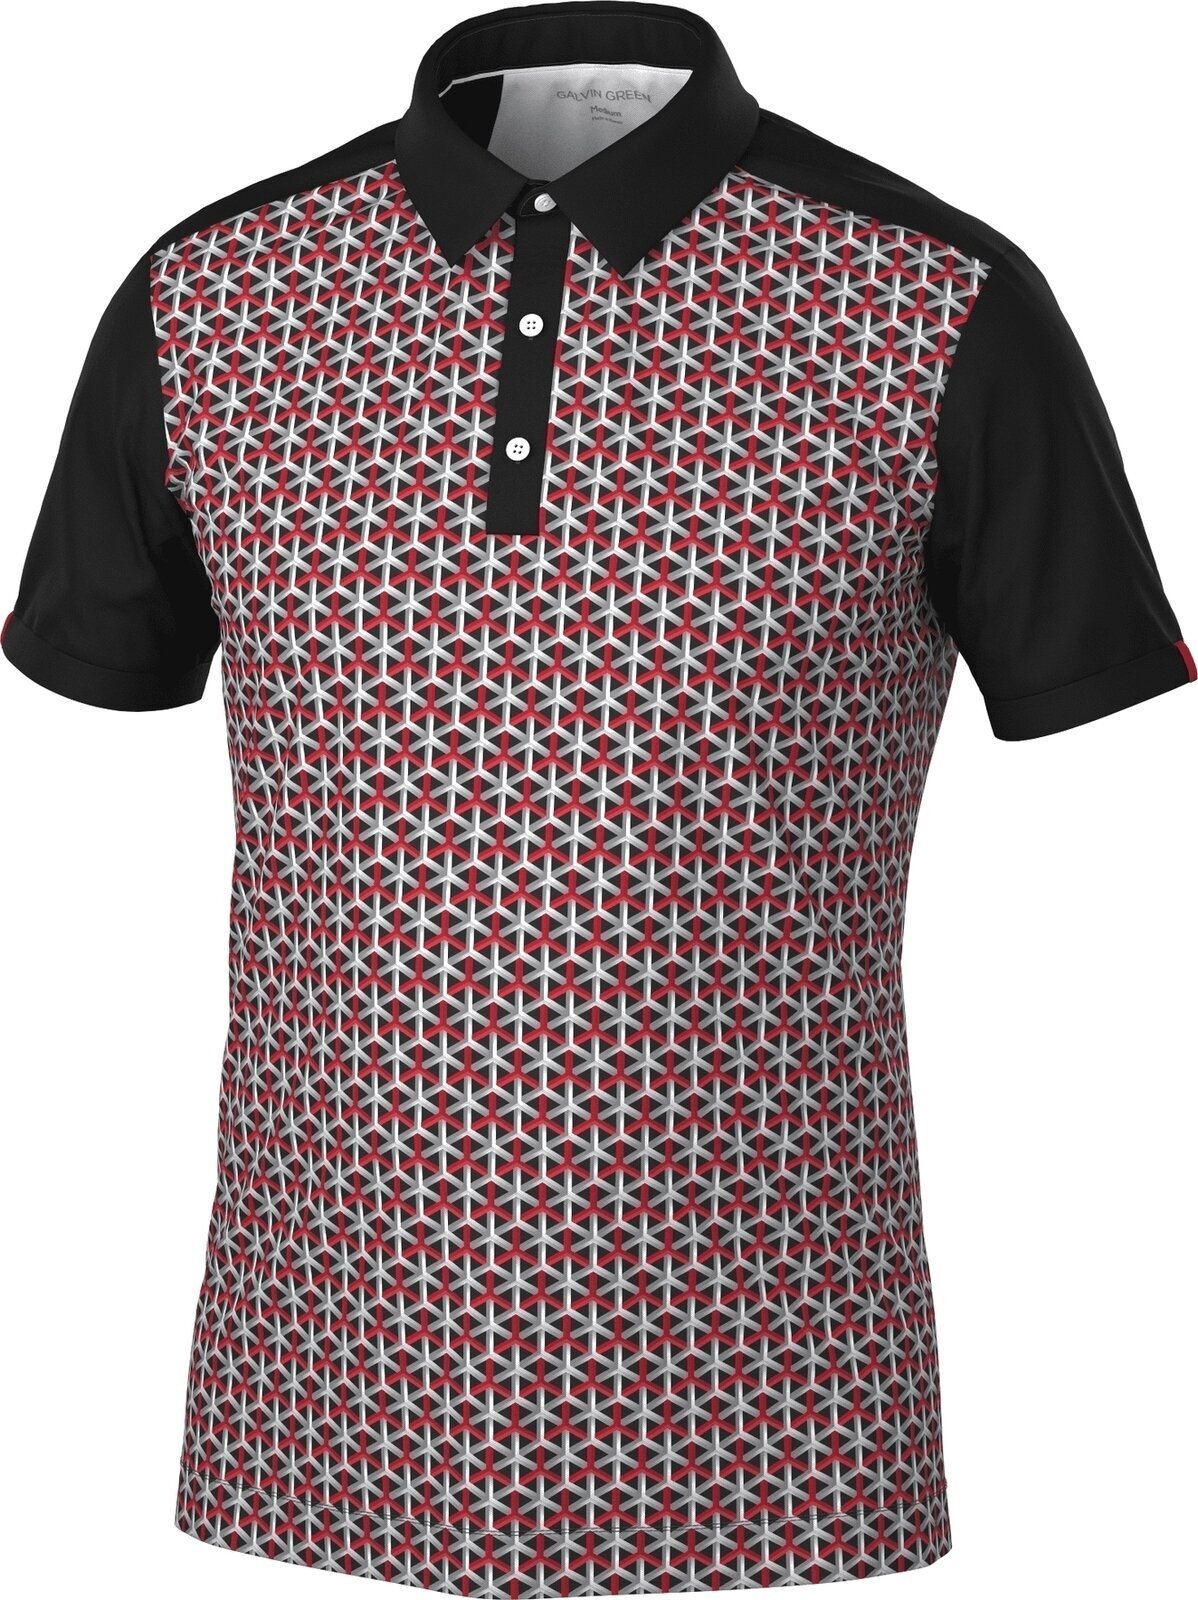 Chemise polo Galvin Green Mio Mens Breathable Short Sleeve Shirt Red/Black M